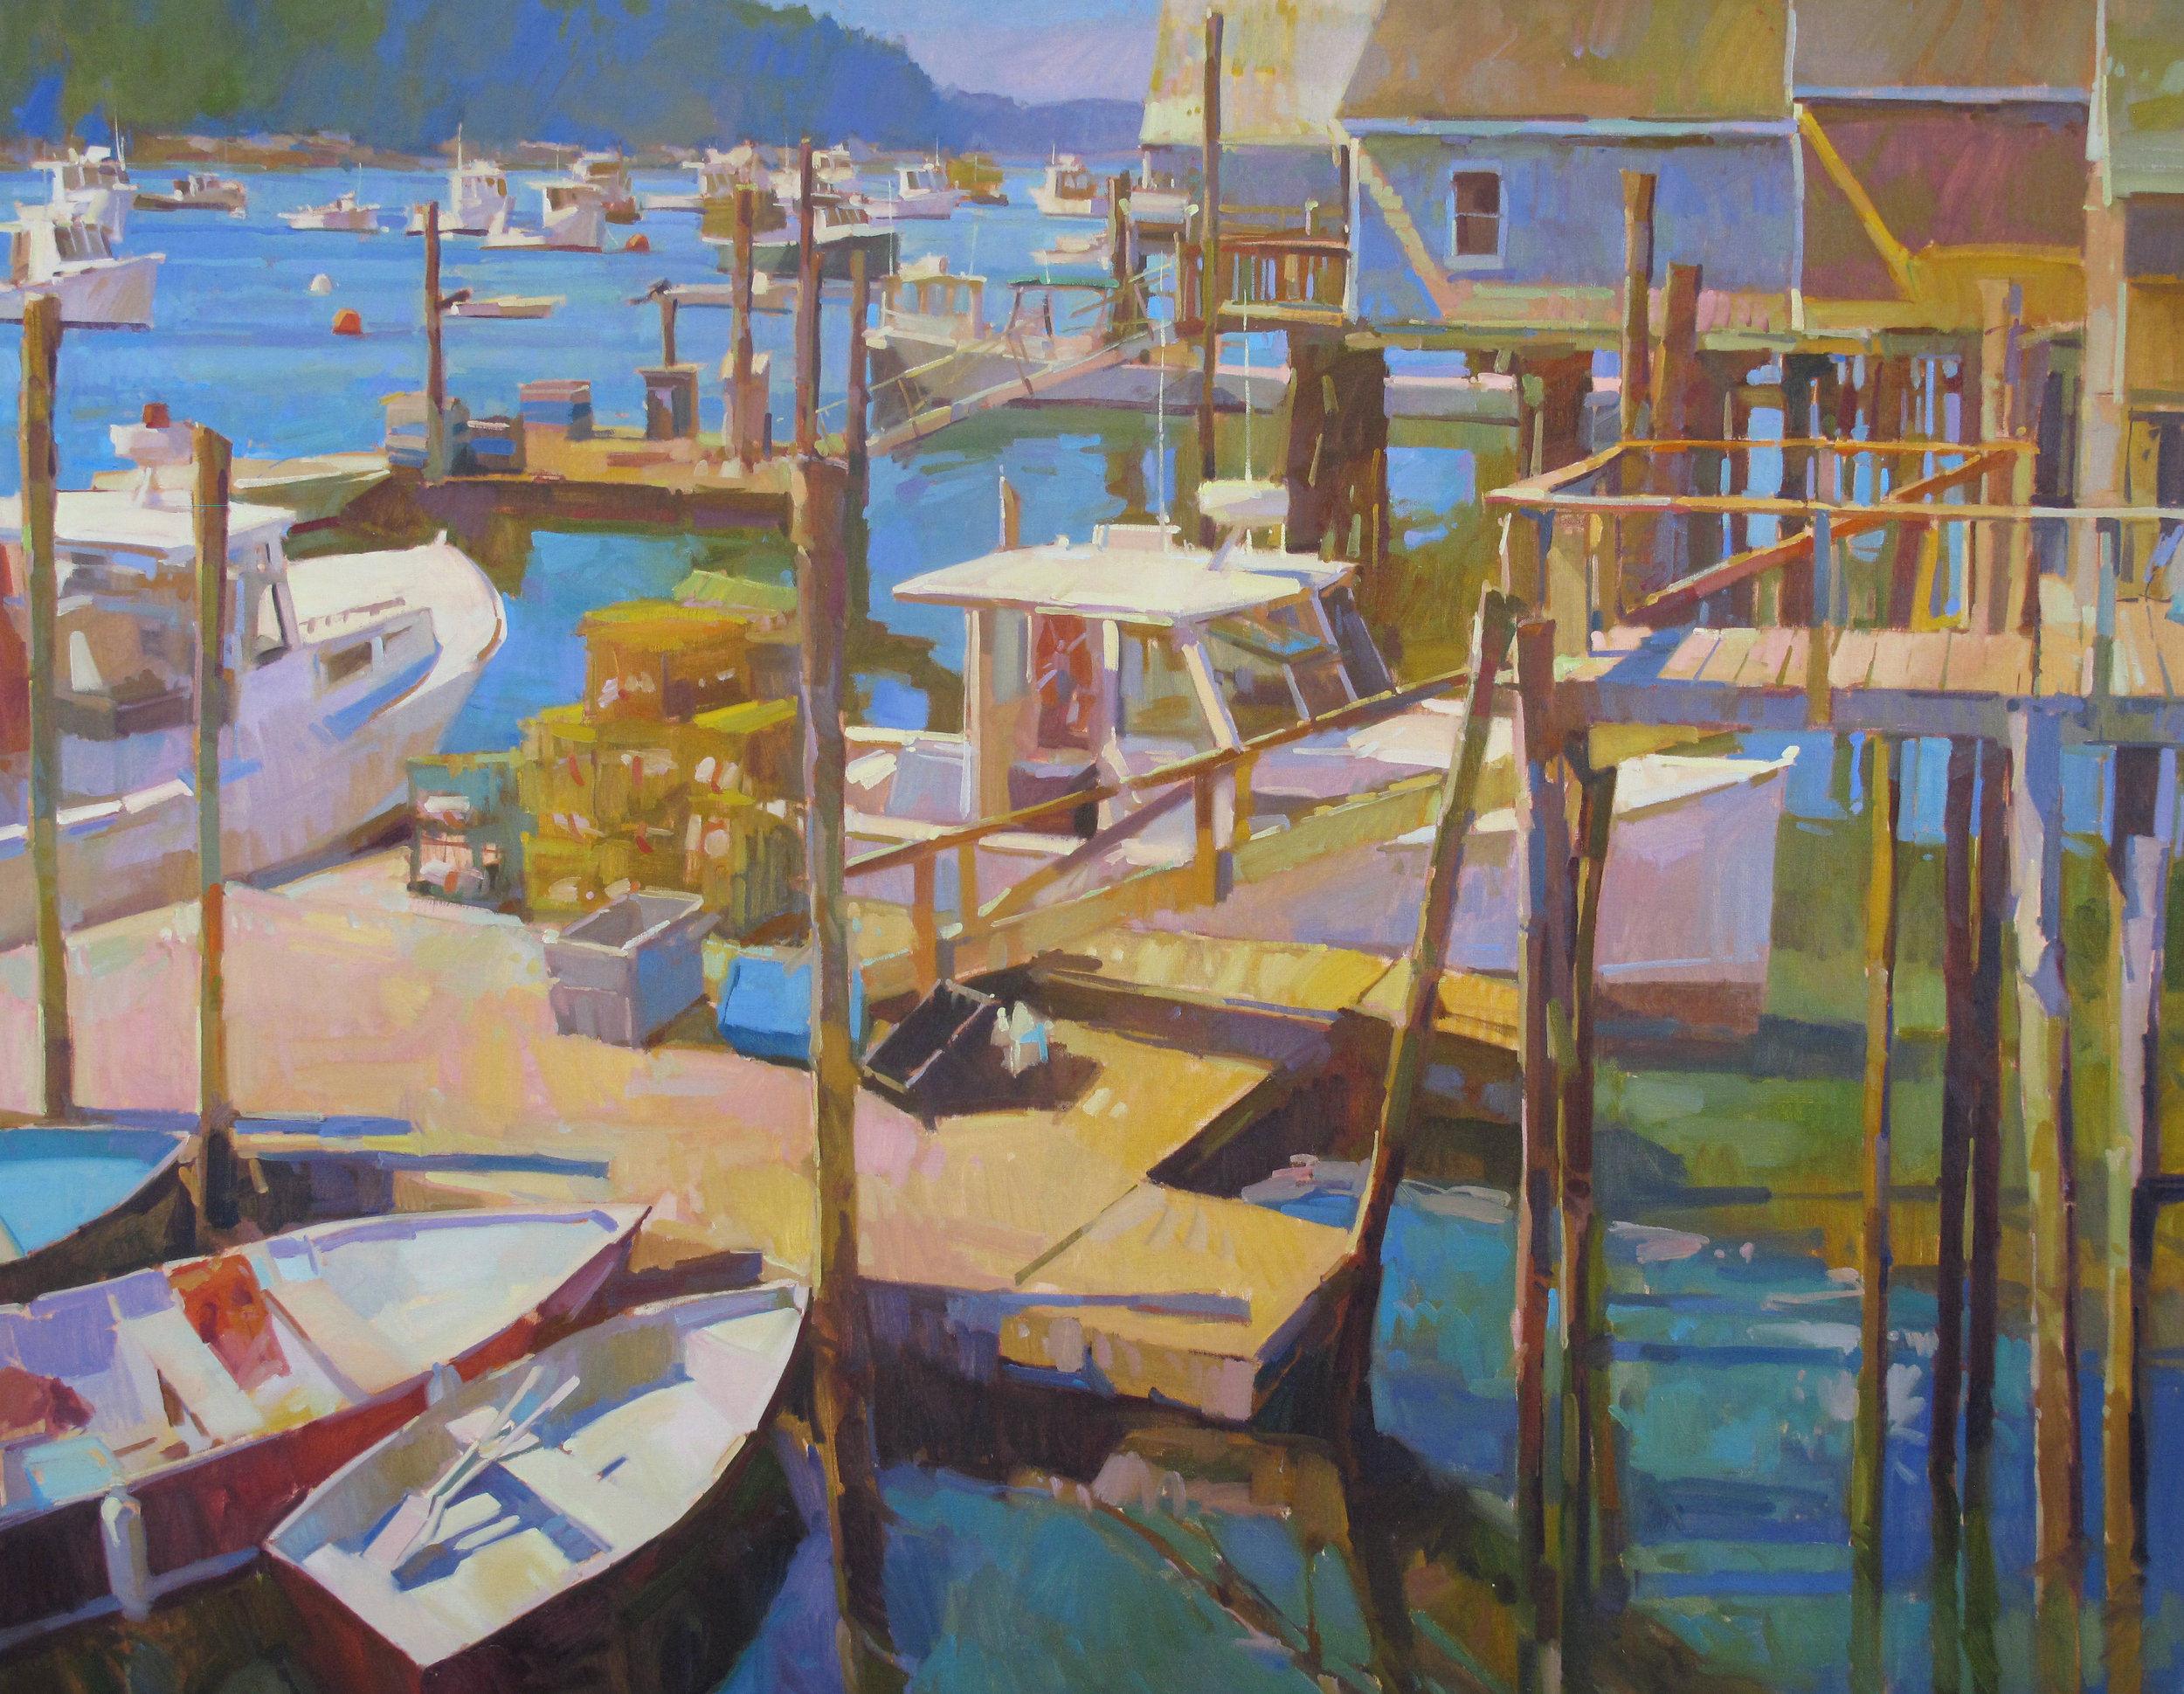  Friendship Harbor  on display at Dowling Walsh Gallery, Rockland, ME  56x72" oil on canvas $20,500    